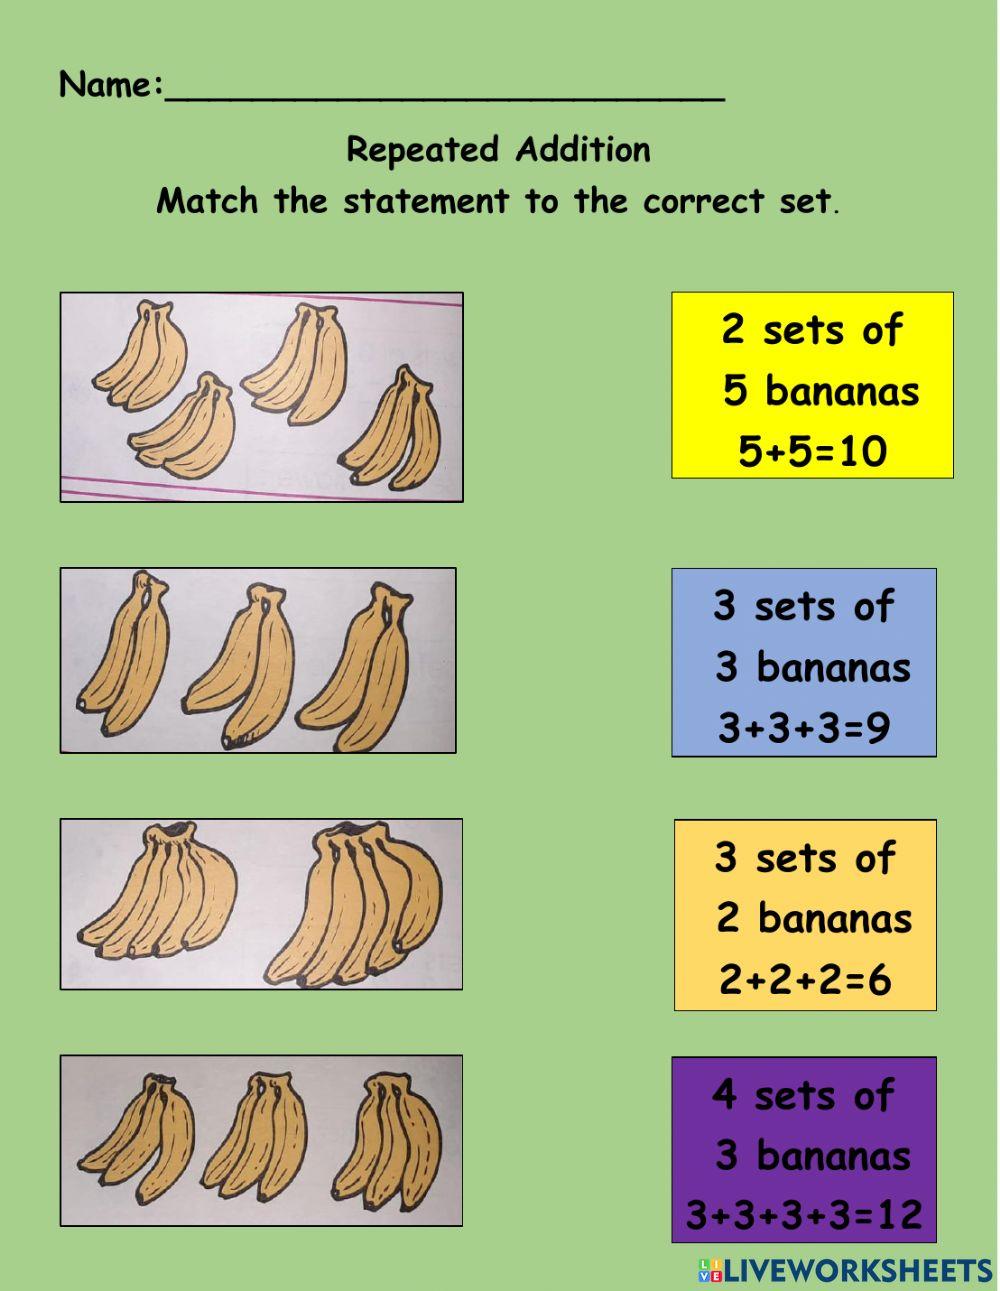 Repeated Addition